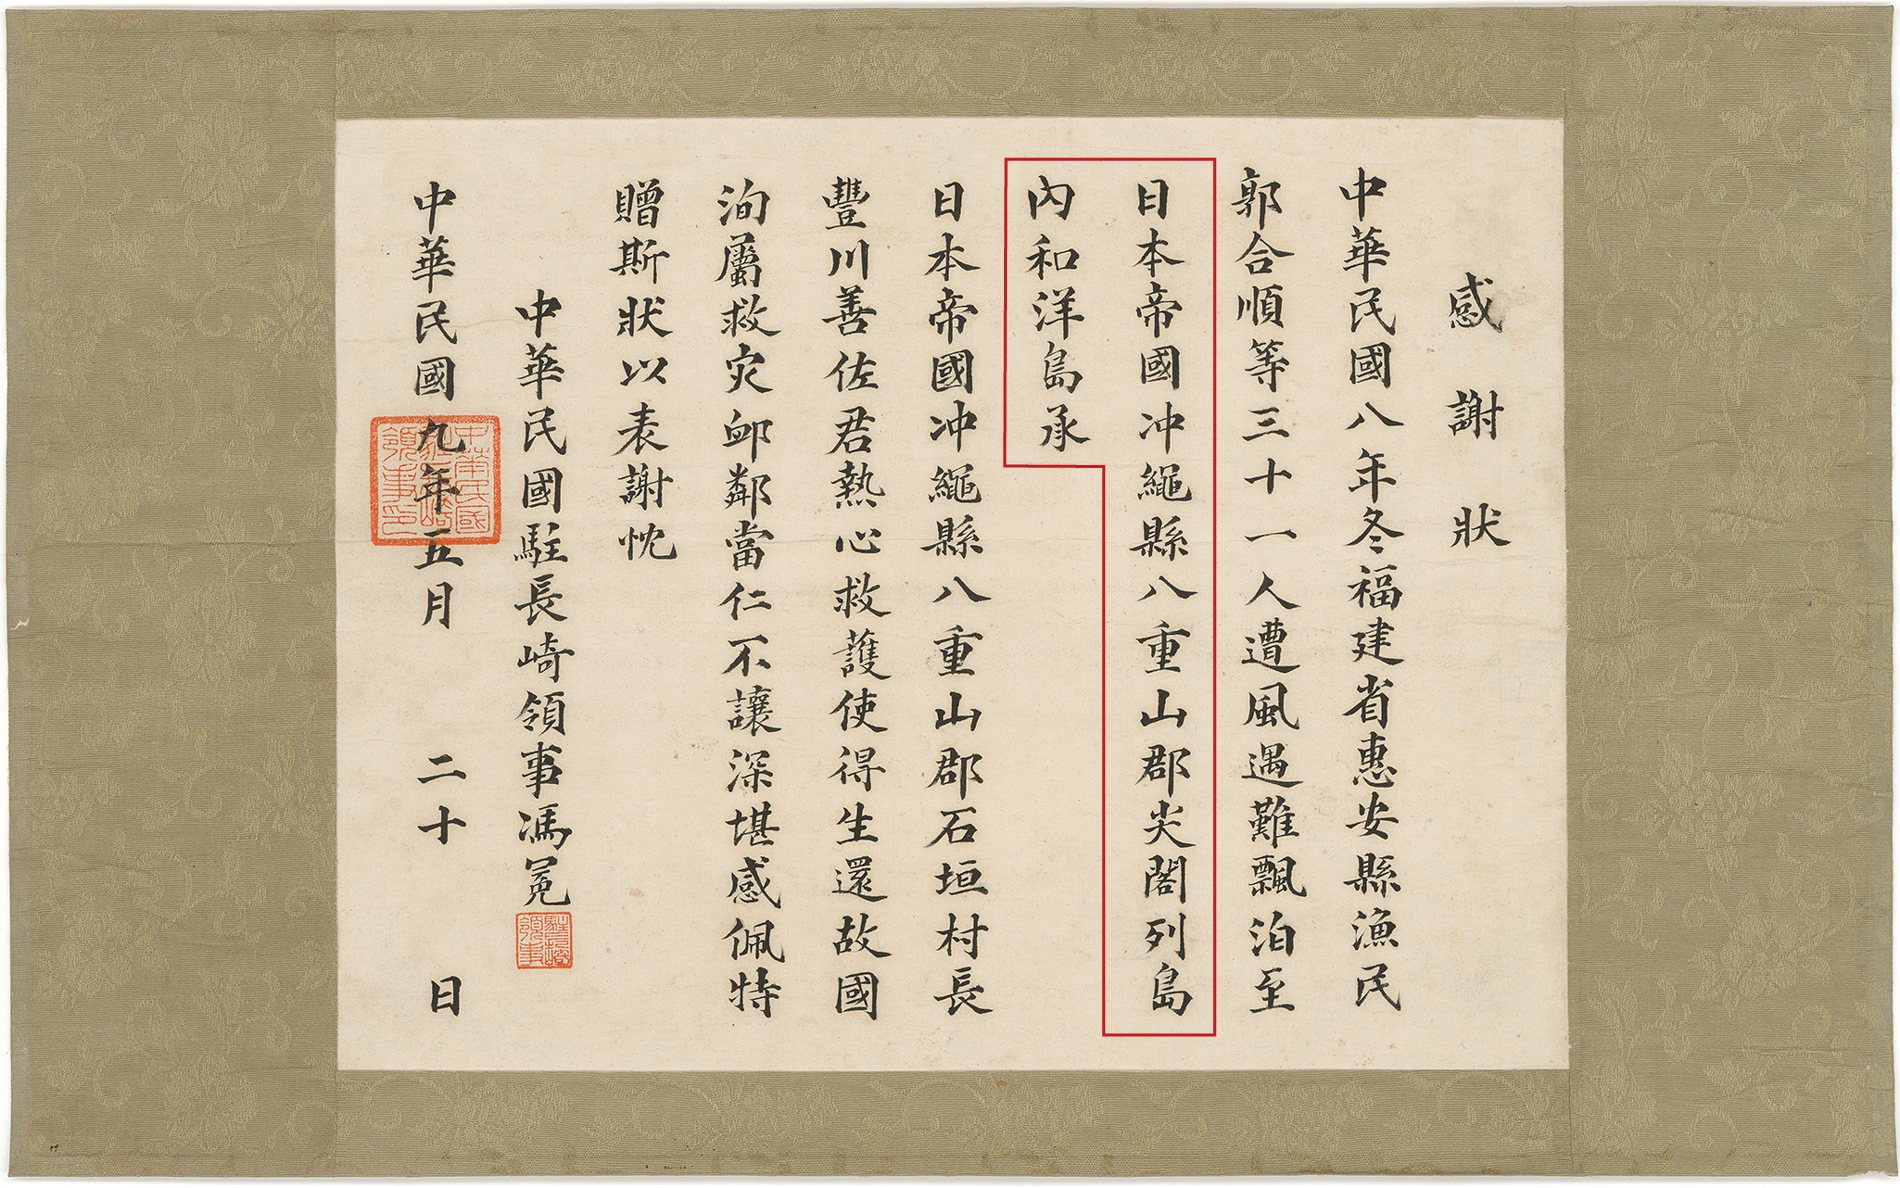 Letter of appreciation from the Republic of China in 1920